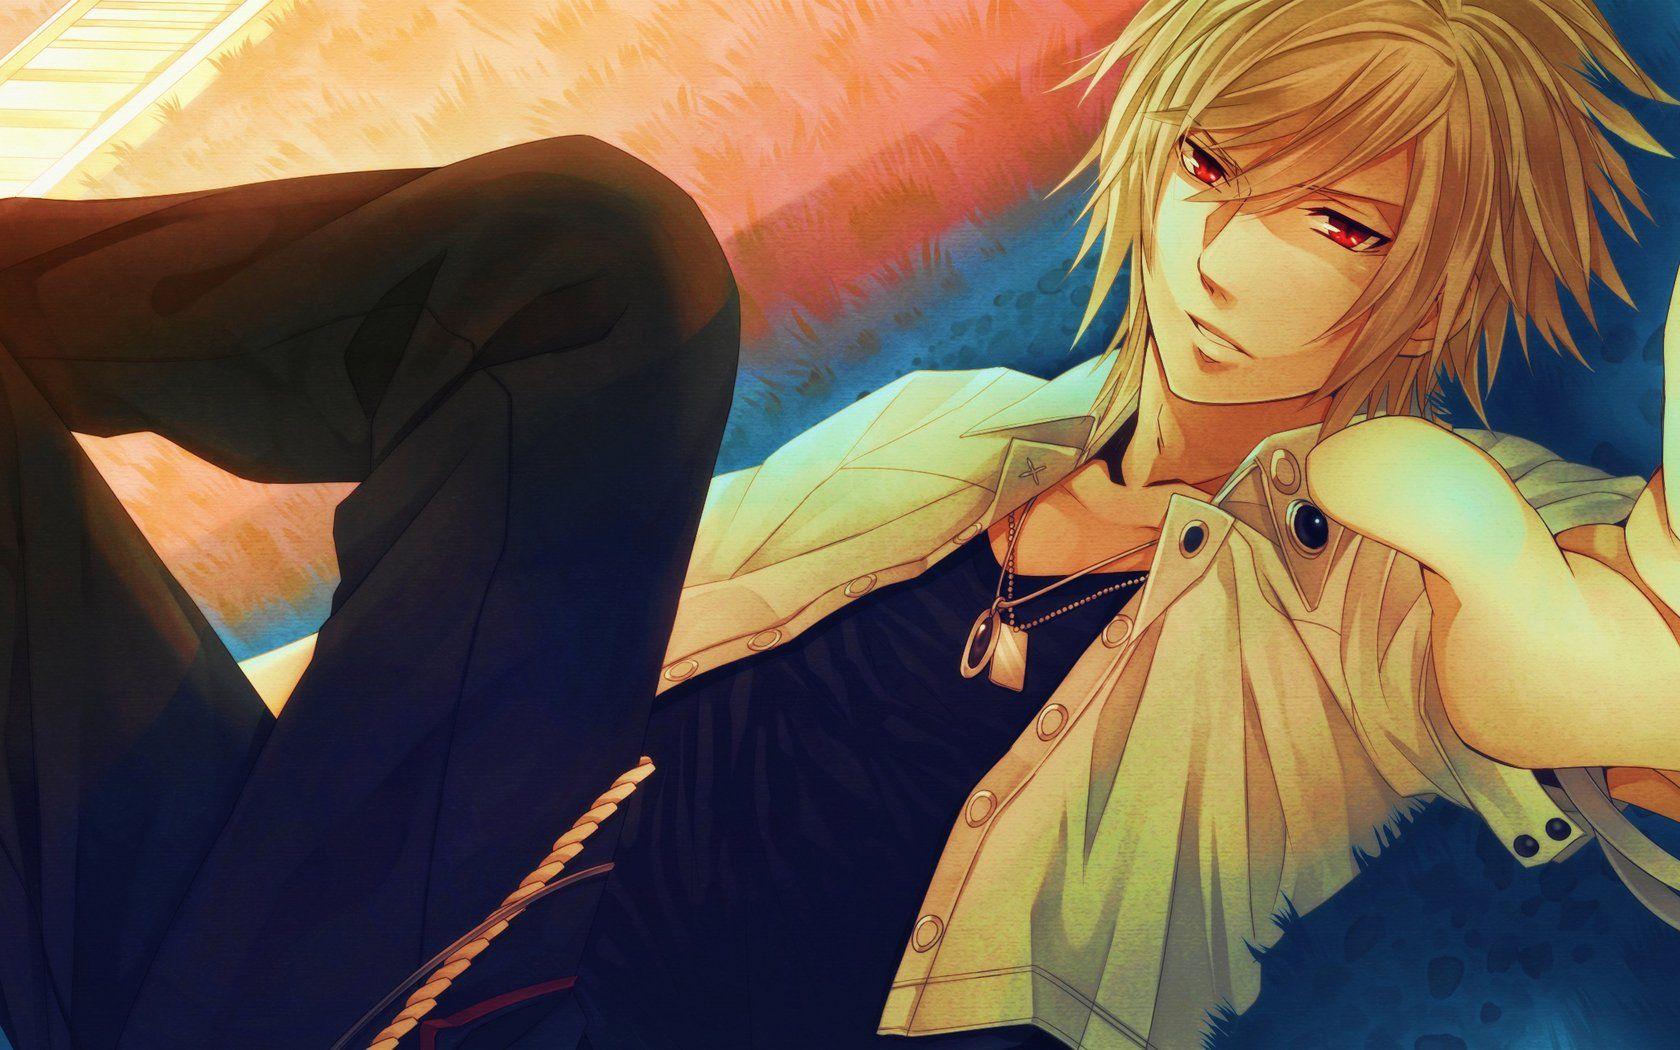 Guy red eyes chain is anime boy blond hair wallpaperx1050